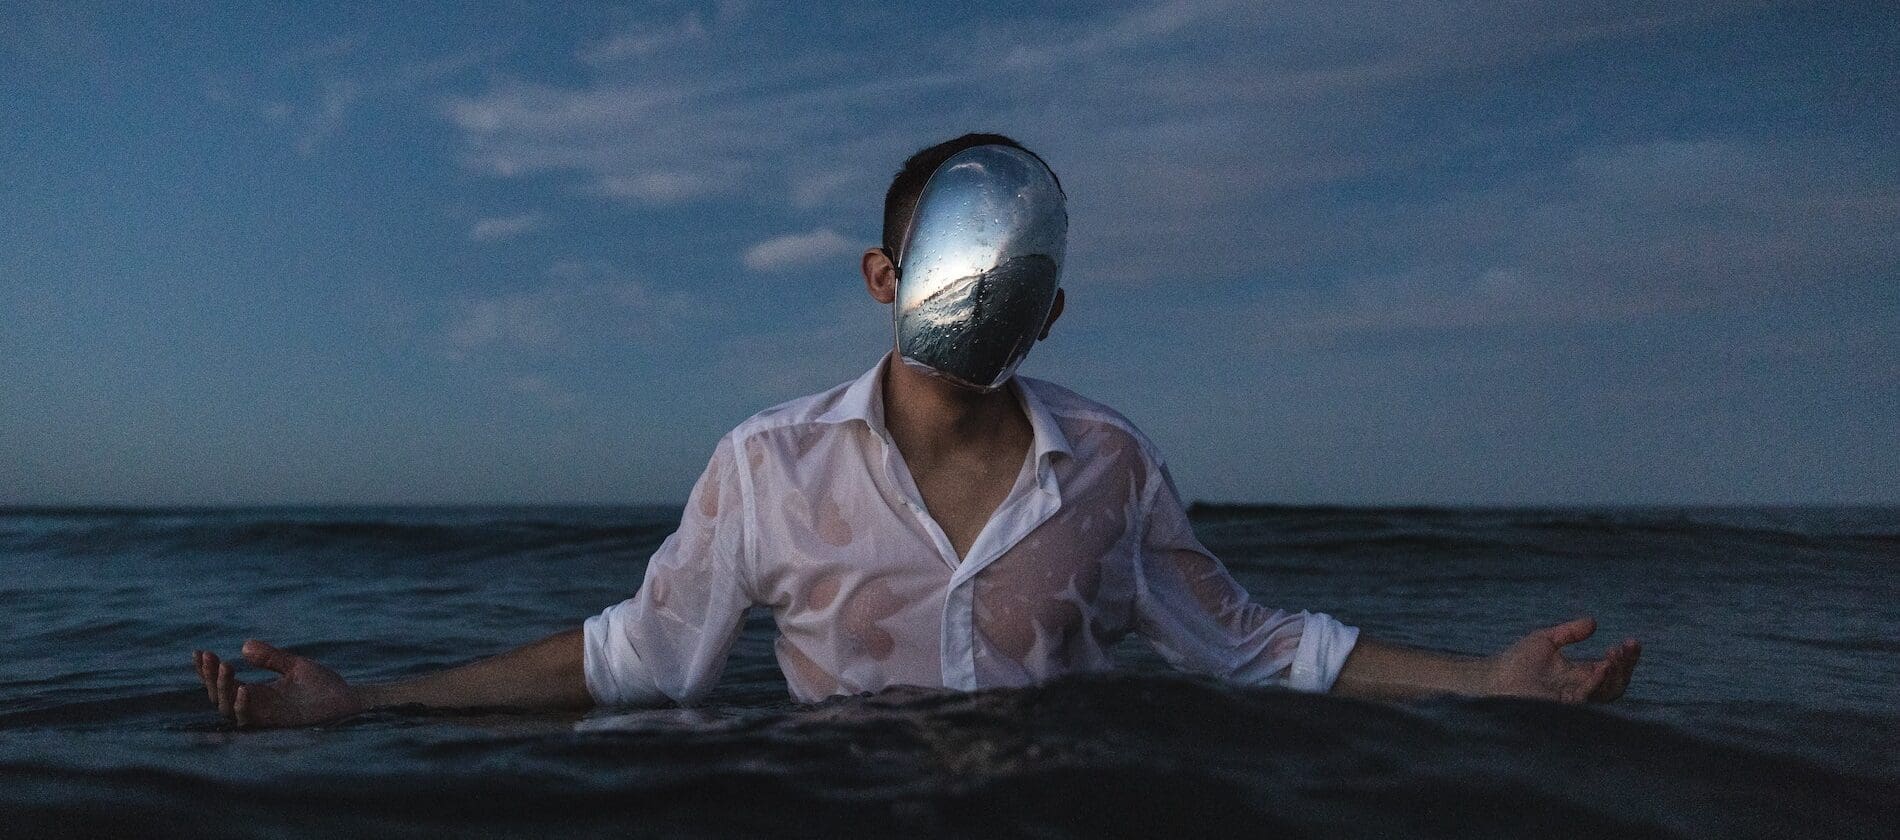 Photo of man in ocean with mask by Alex Iby for Unsplash